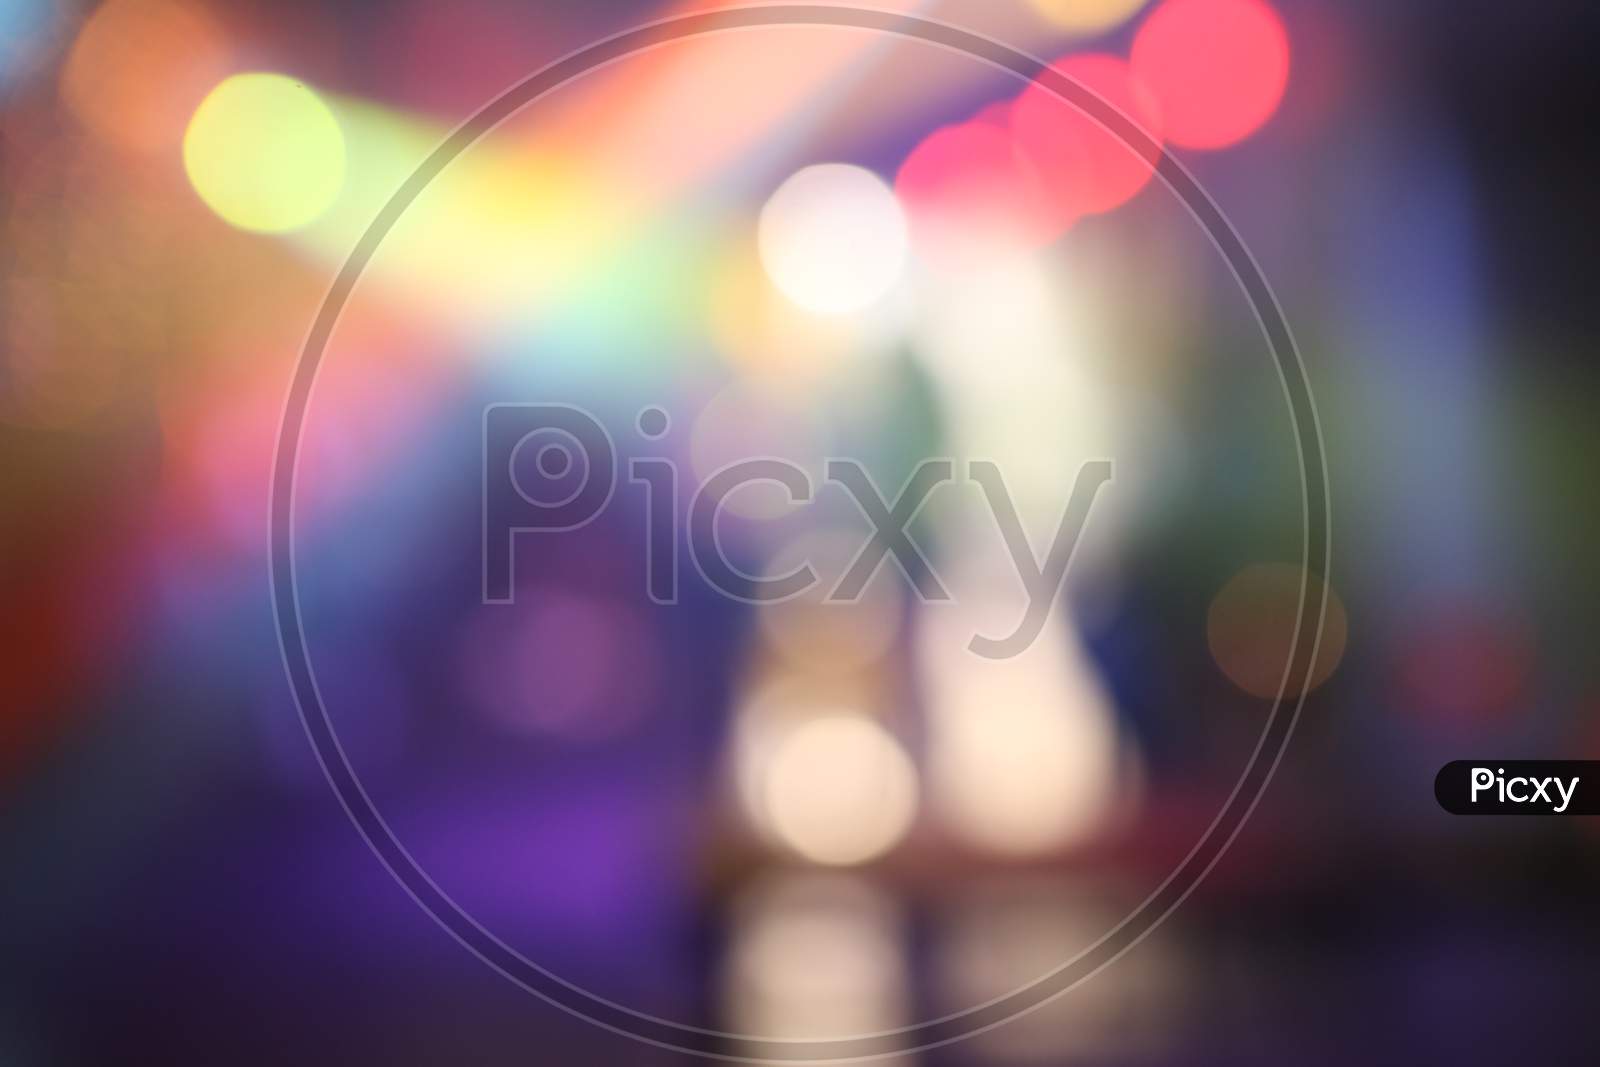 Led Lights Bokeh Background In a Pub